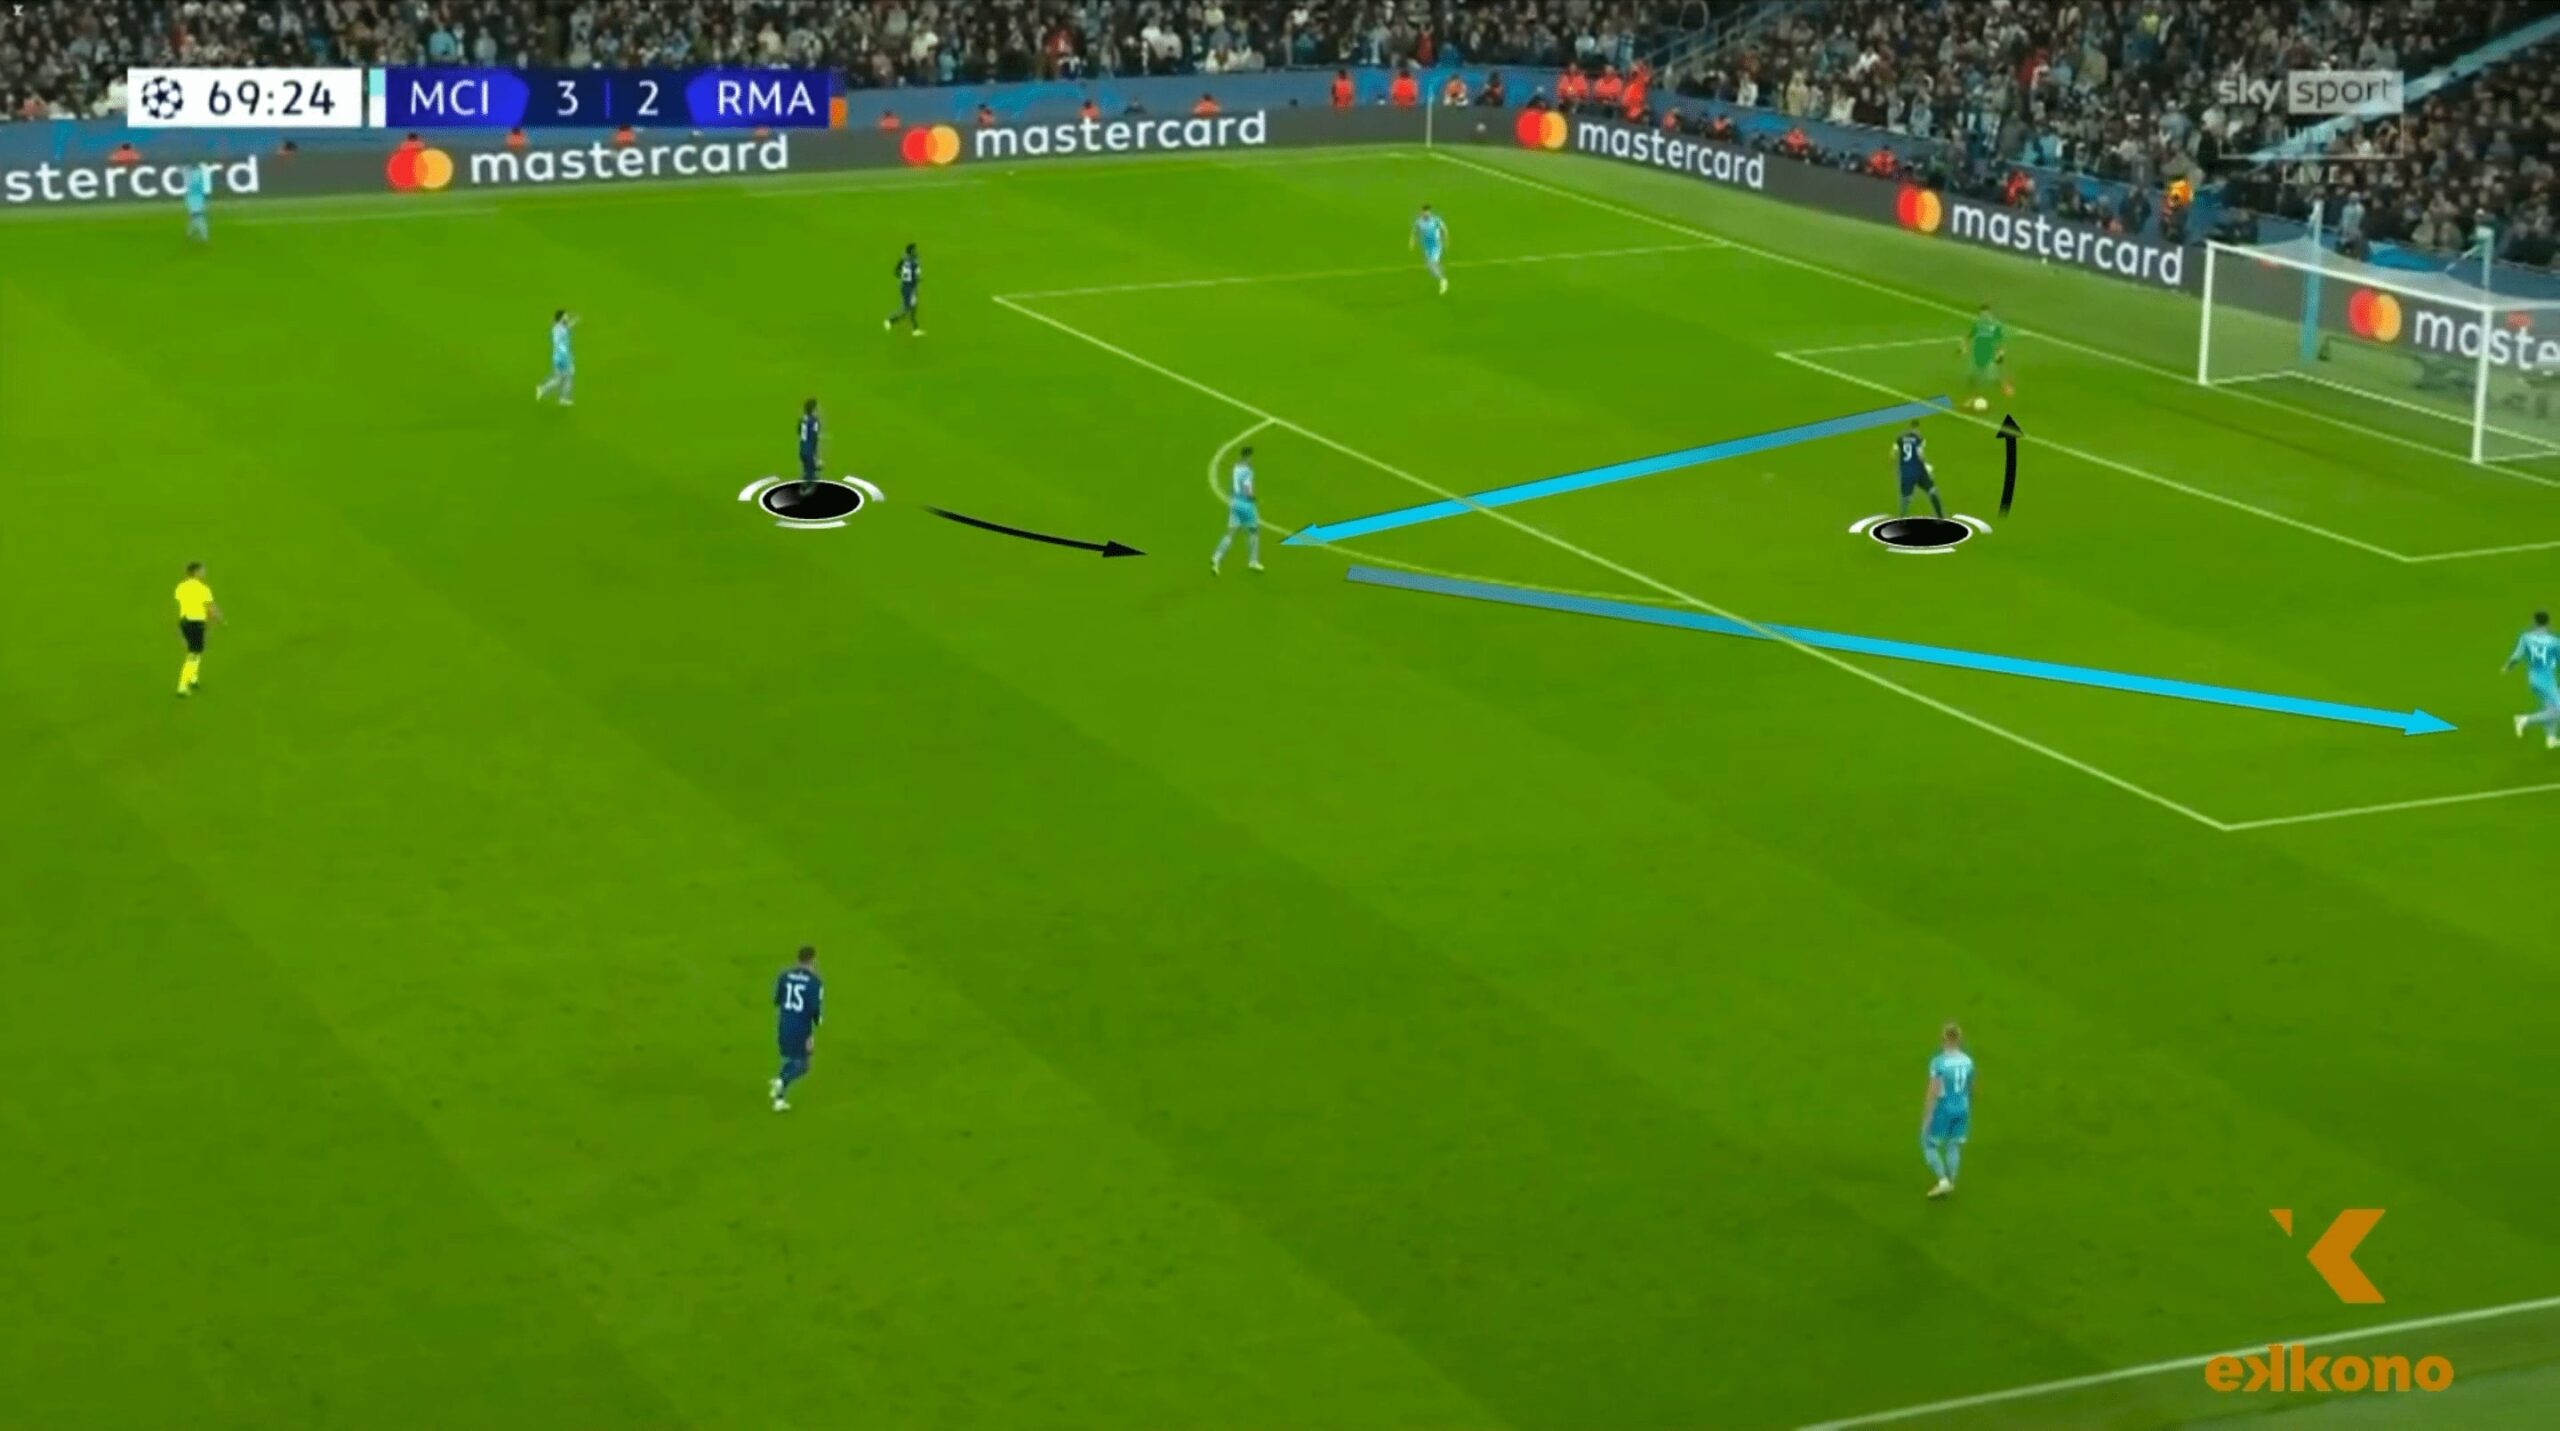 Ederson plays towards Rodrigo's right foot, so it is easier for him to pass to Laporte on the first touch.